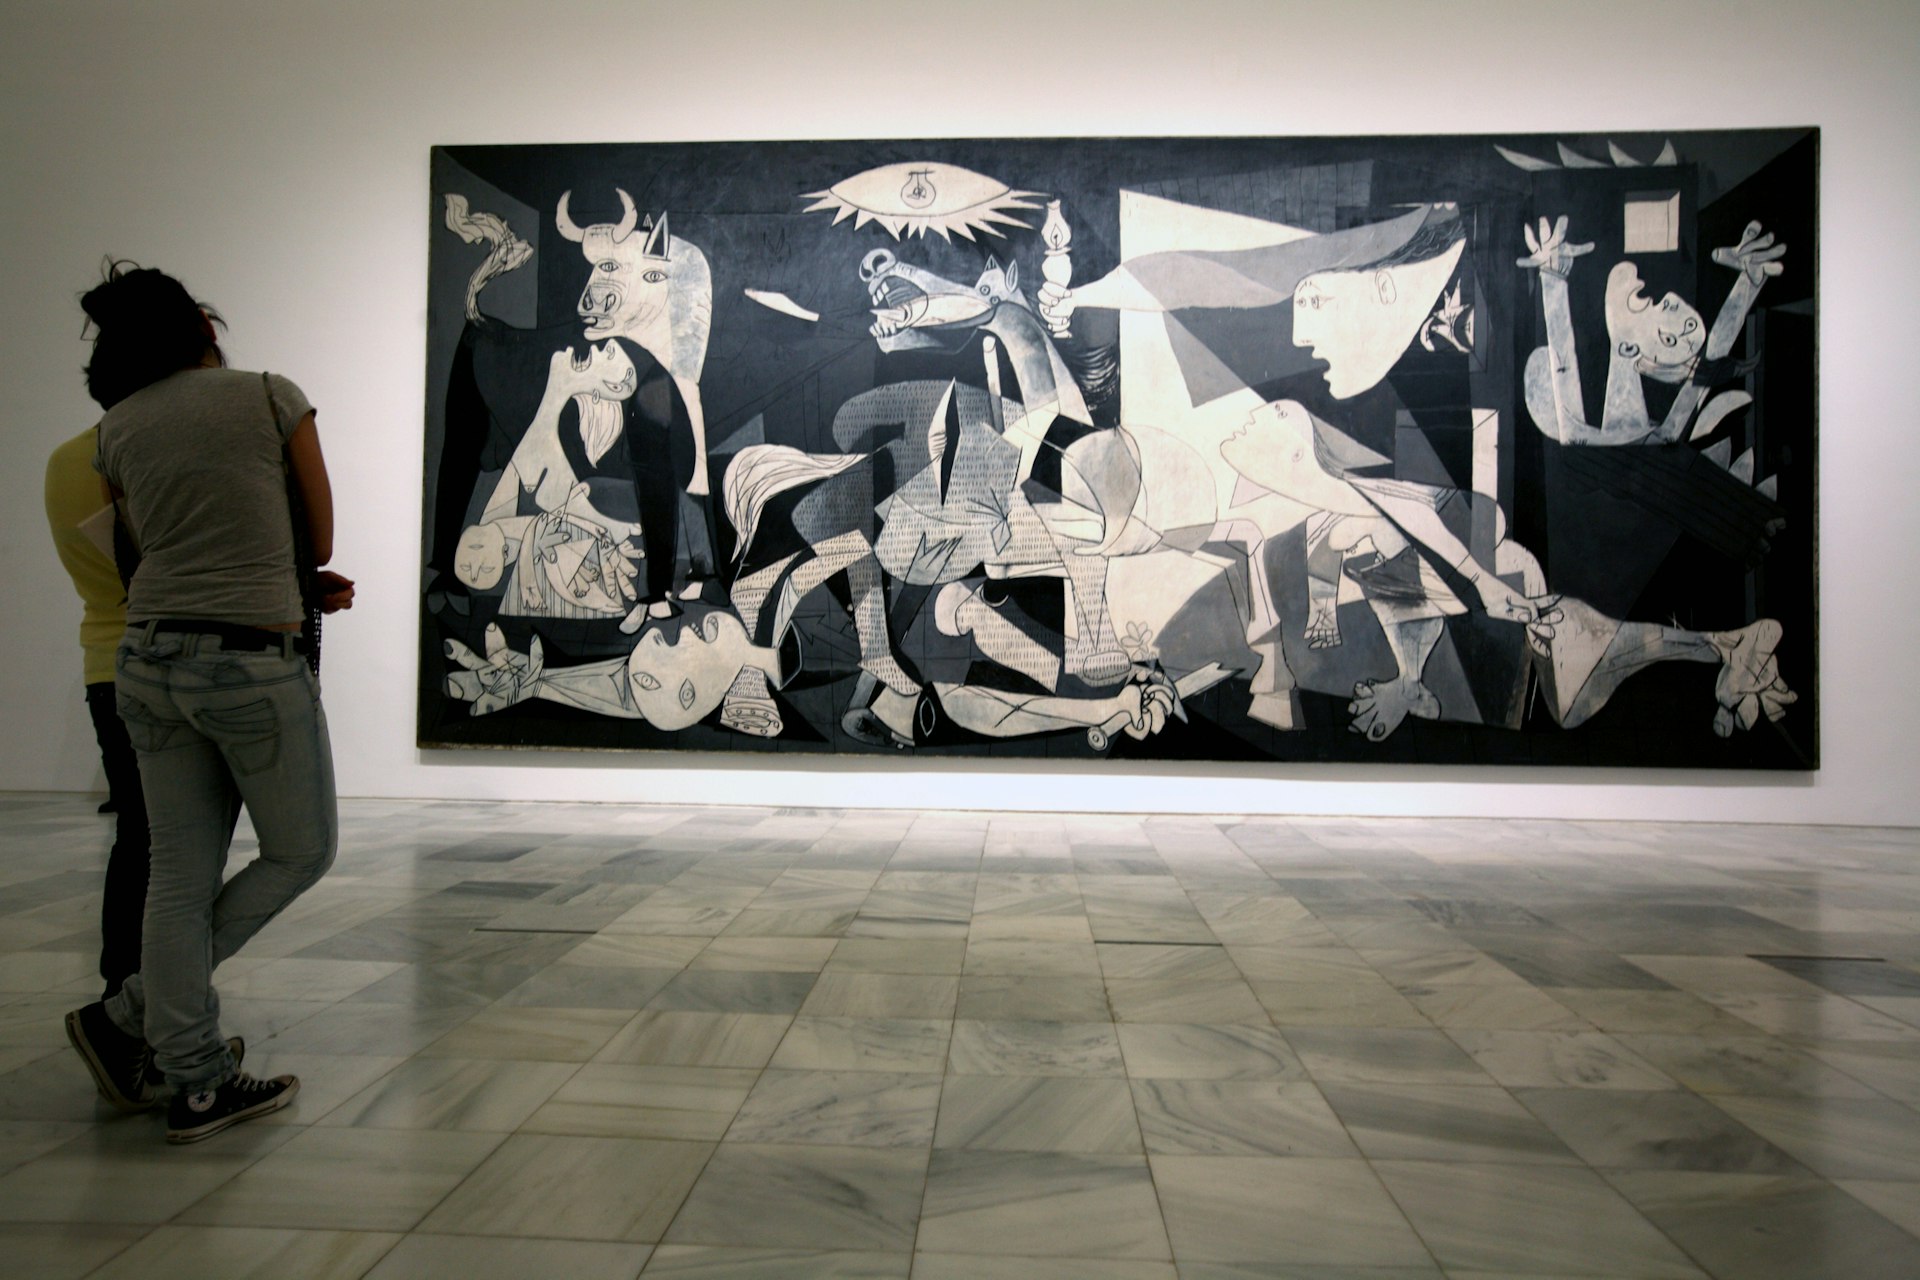 Two museum visitors look at Pablo Picasso's Guernica, a huge black-and-white abstract painting, in Reina Sofia National Art Museum, Madrid